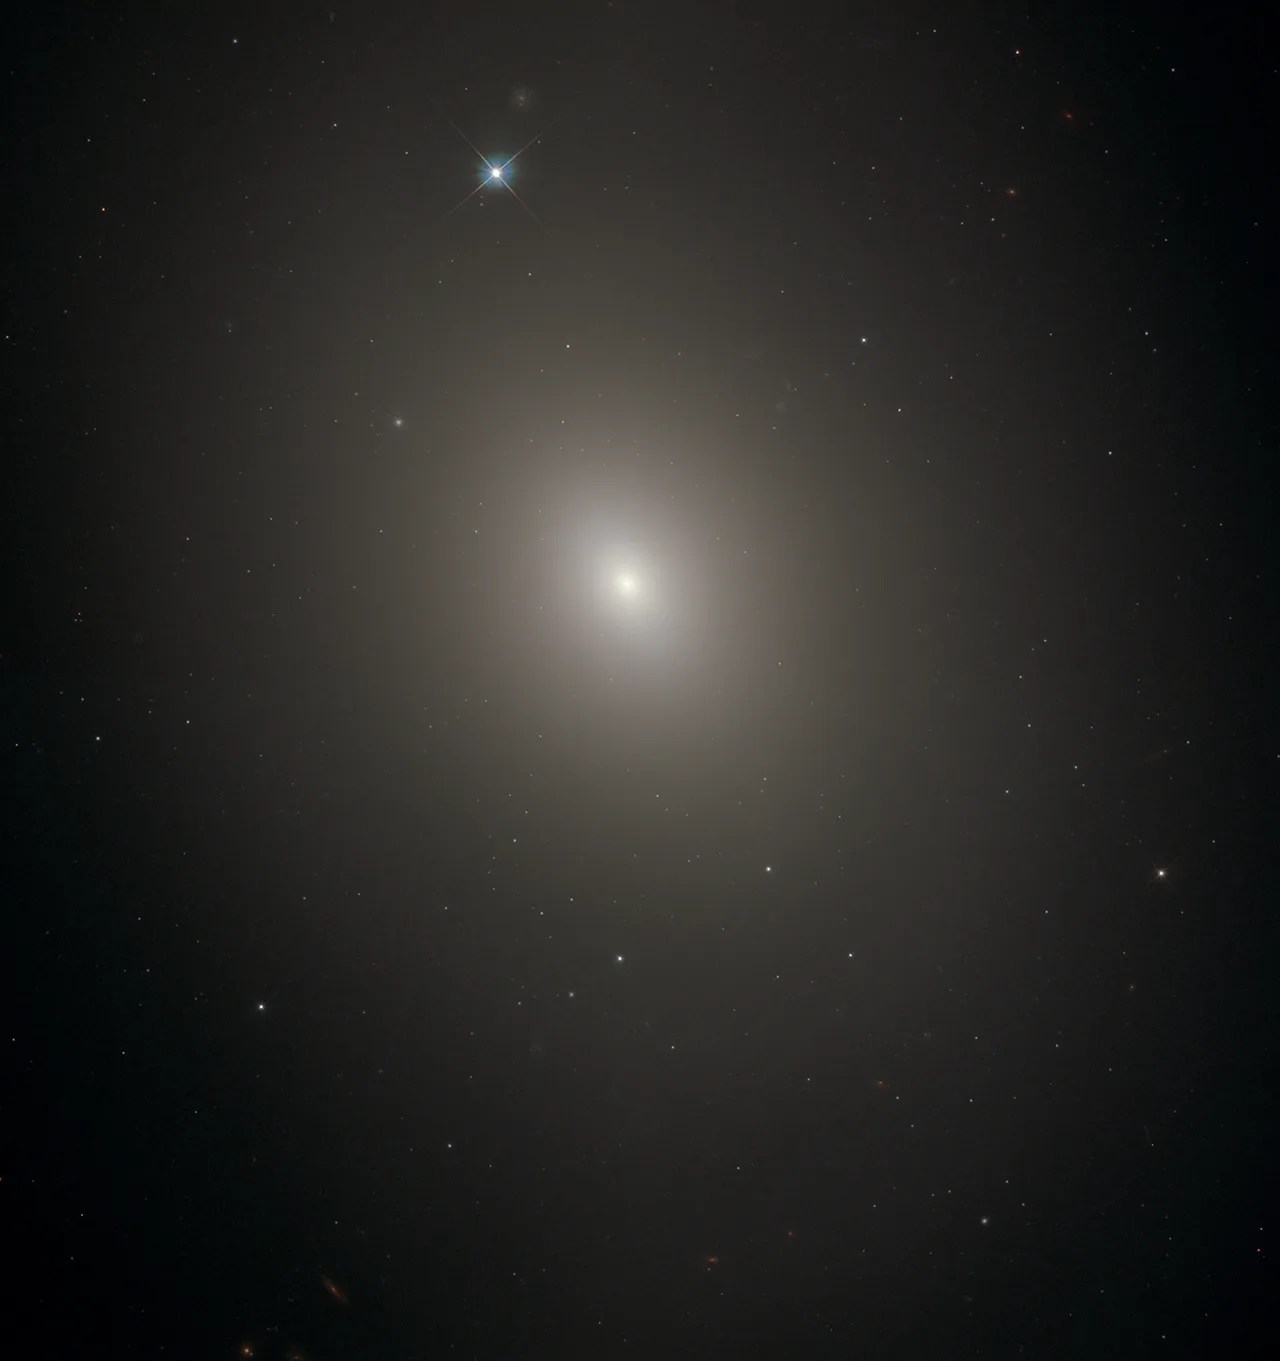 Diffuse oval haze against black background. Stars and distant galaxies shine through it. Just above image center the haze gets brighter and denser toward the bright-white core of the galaxy. Top, just left of center is a bright foreground star.